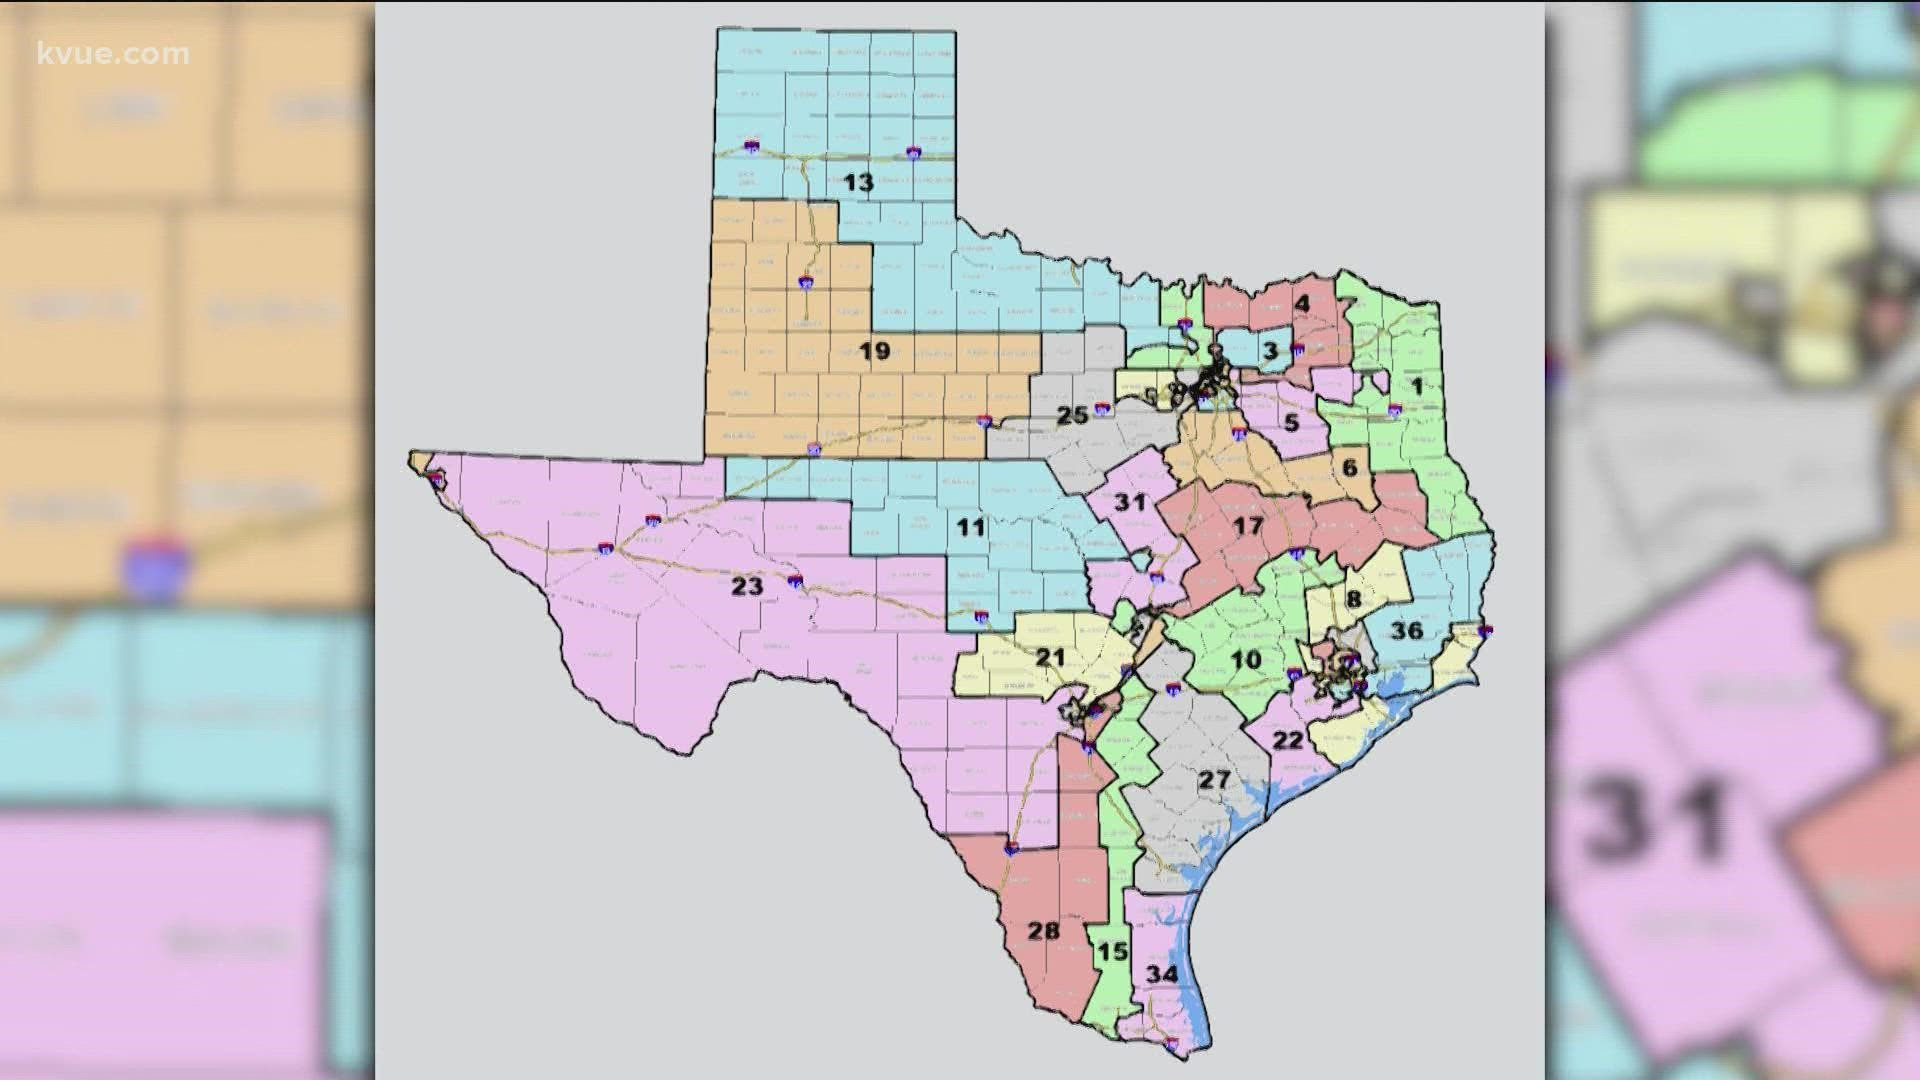 The U.S. Department of Justice is suing the State of Texas over its new political district maps. KVUE's Bryce Newberry has the details.